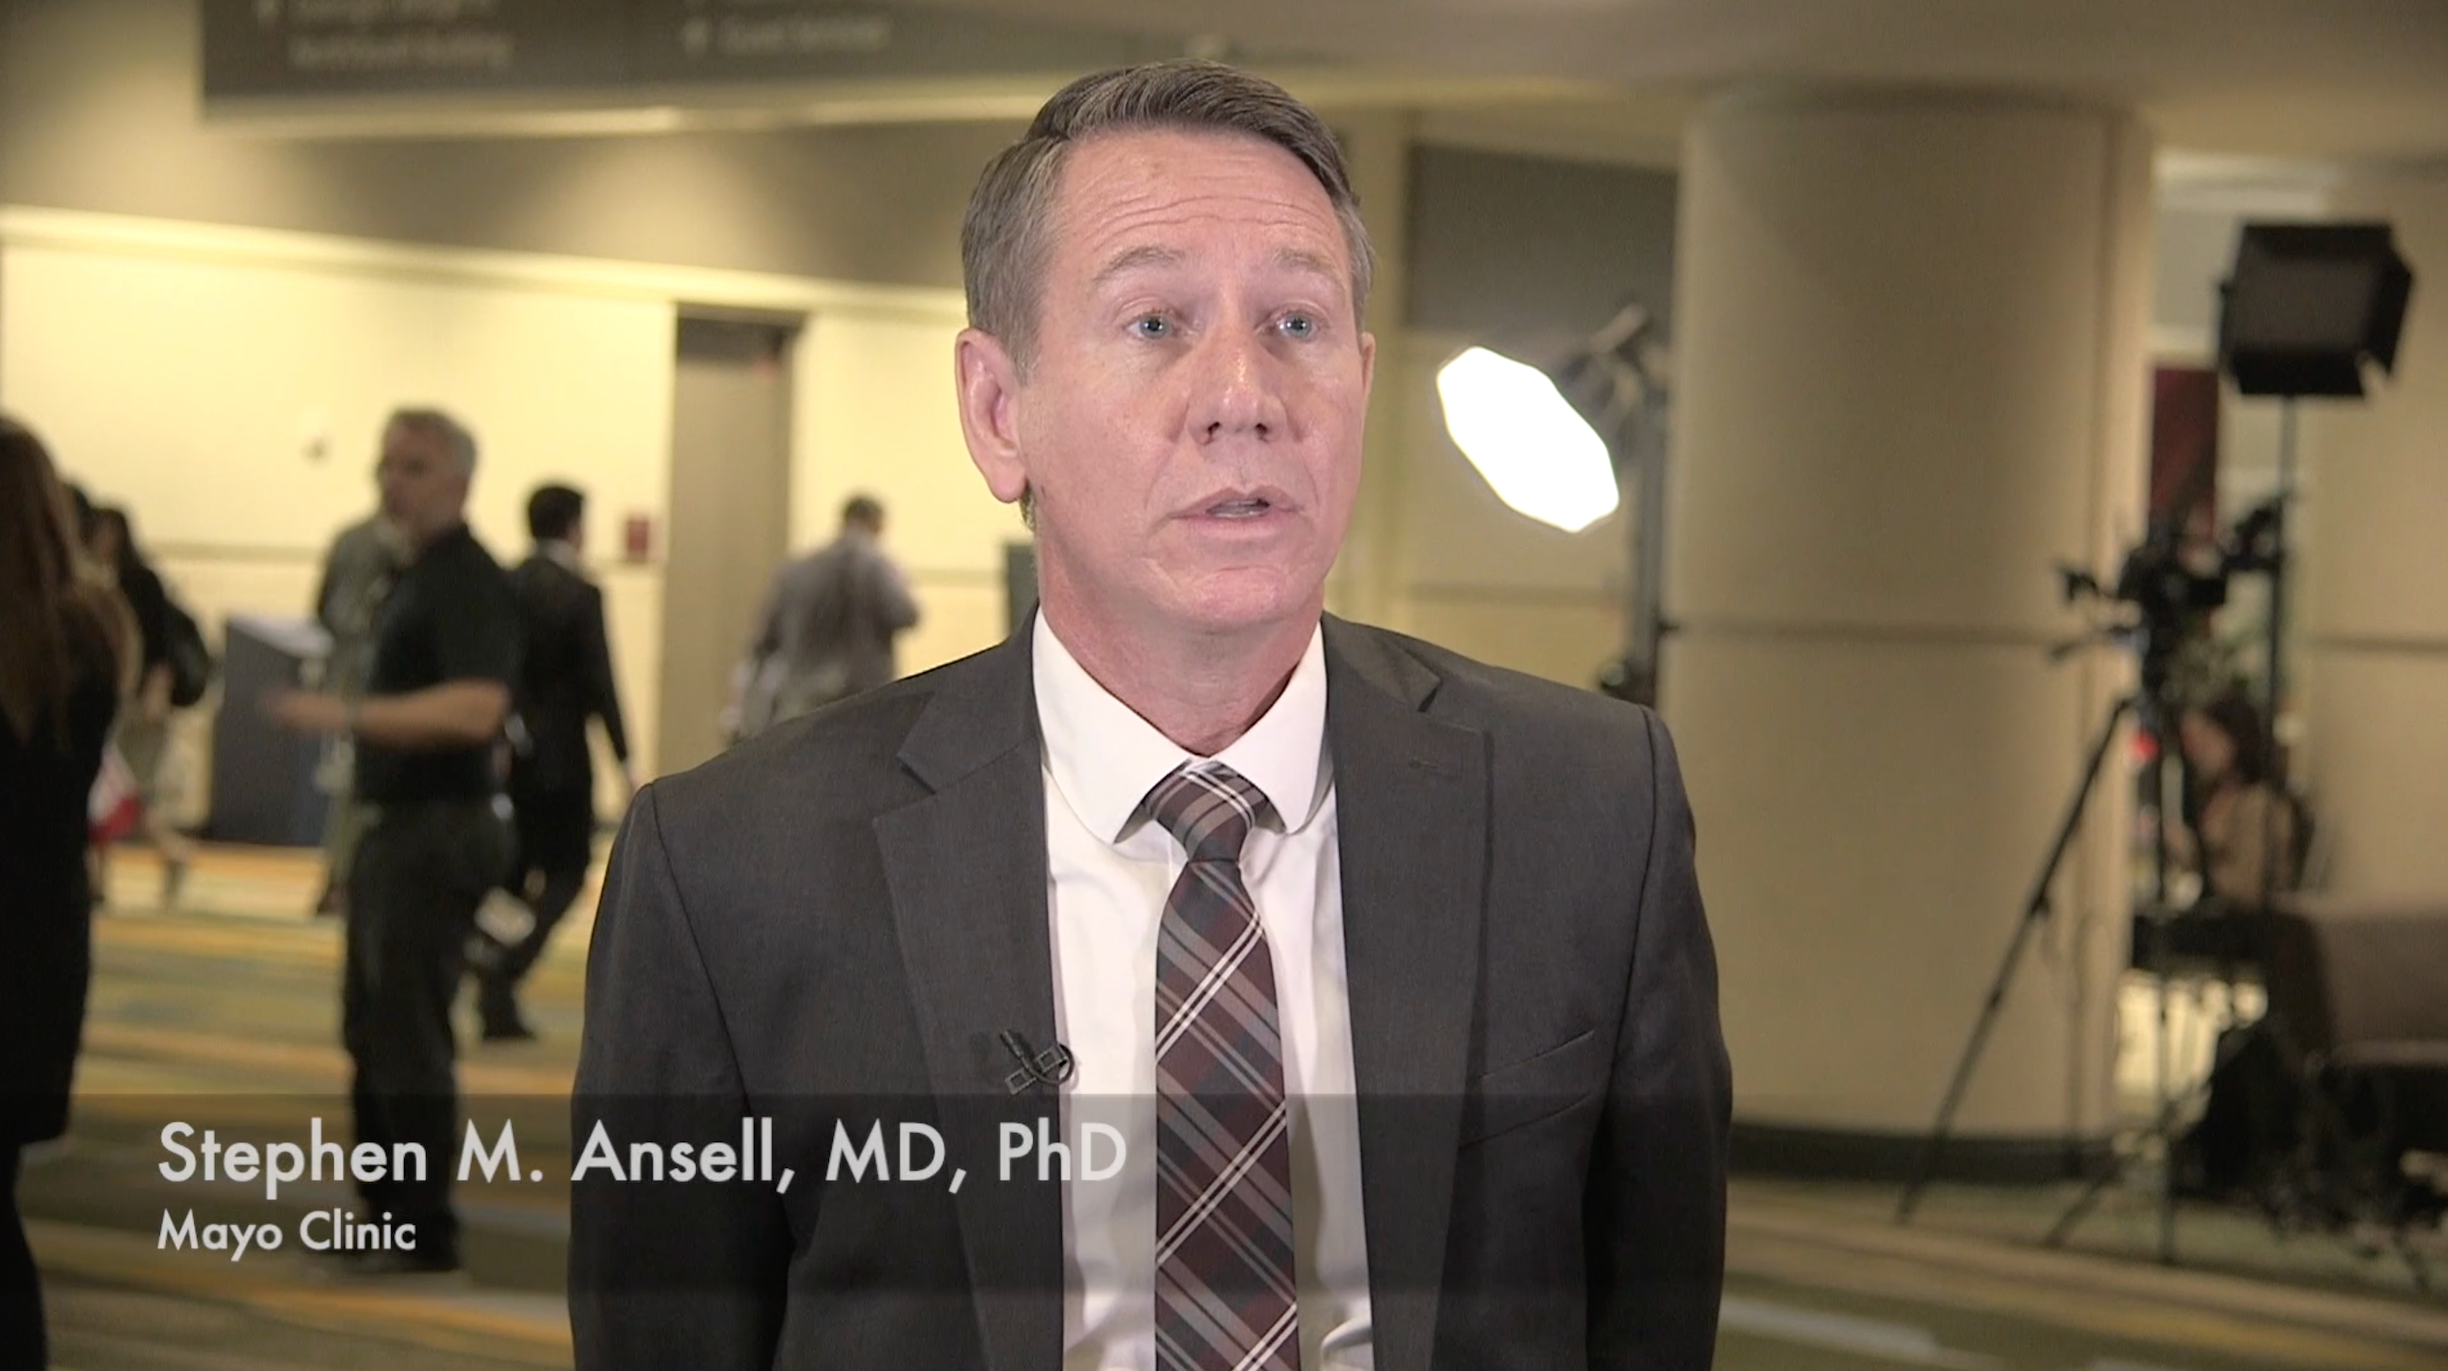 Stephen M. Ansell, MD, PhD, on Progress of CAR T-Cell Therapy